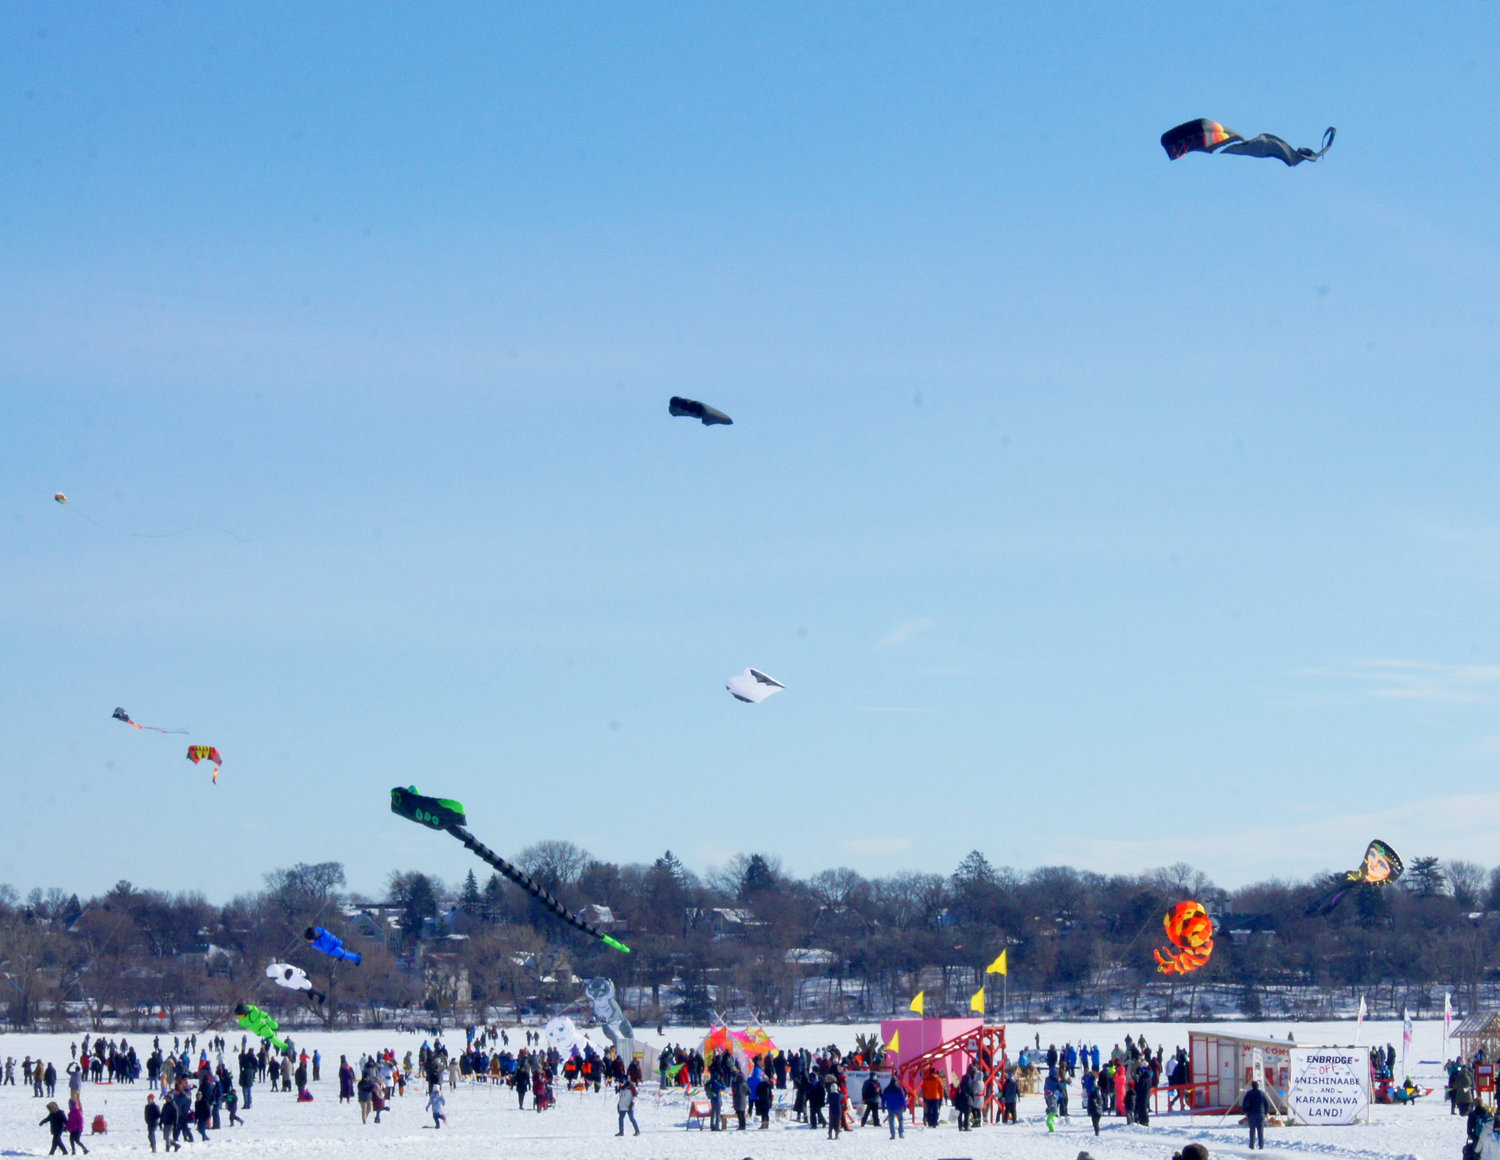 The Kite Festival had a sunny day and a good turnout. Winds were not always cooperative, but most kites made it aloft.